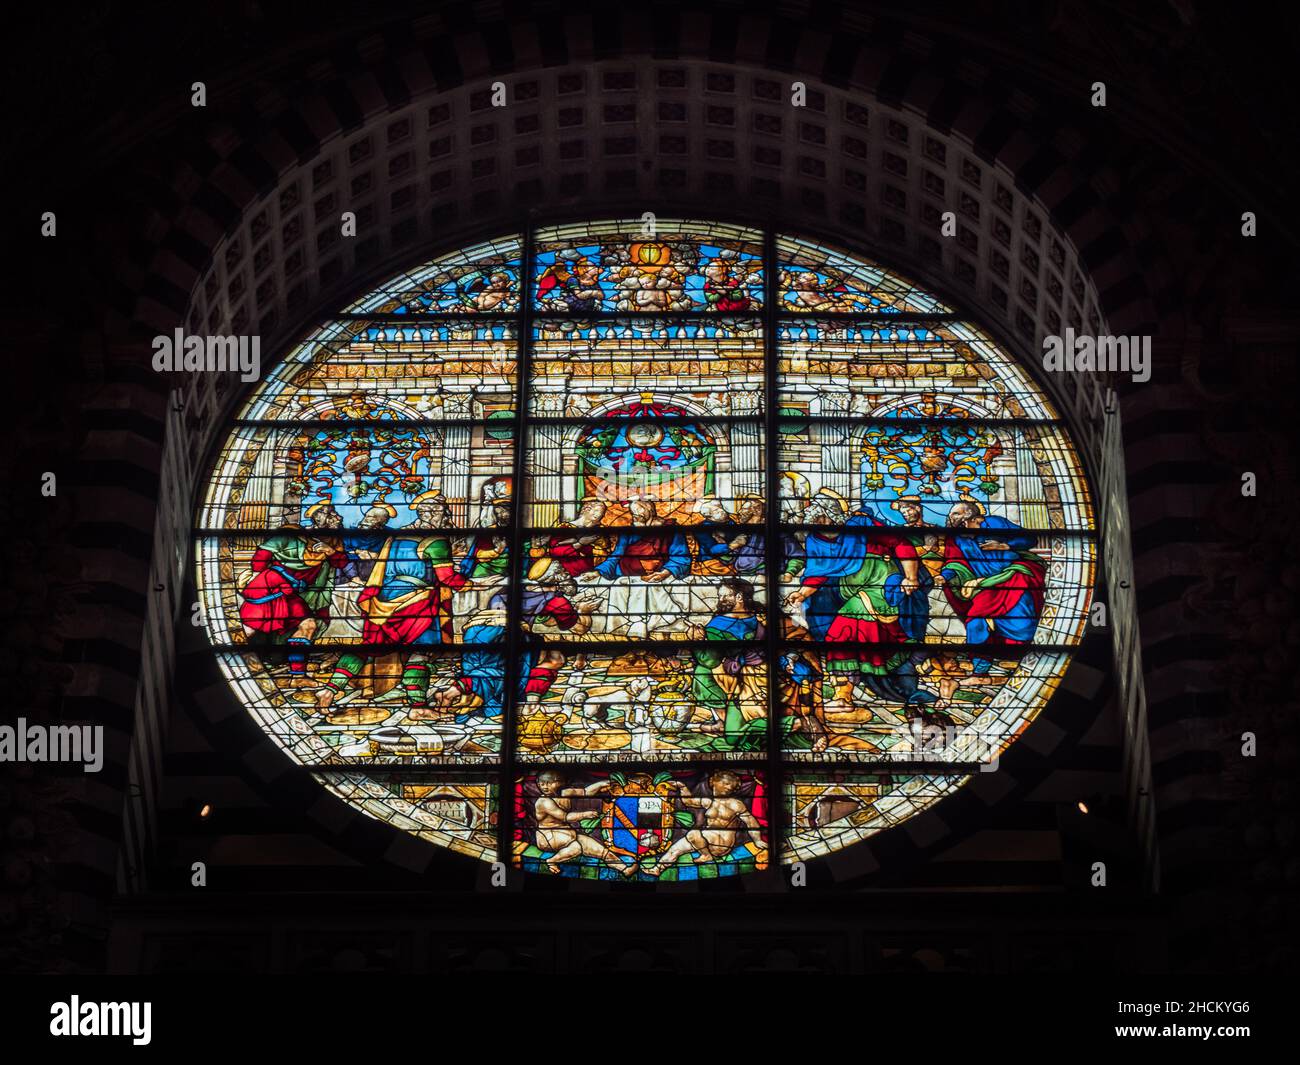 Siena, Tuscany, Italy - August 15 2021: Duomo di Siena Cathedral Stained Glass Rose Window depicting Jesus and the Last Supper Stock Photo